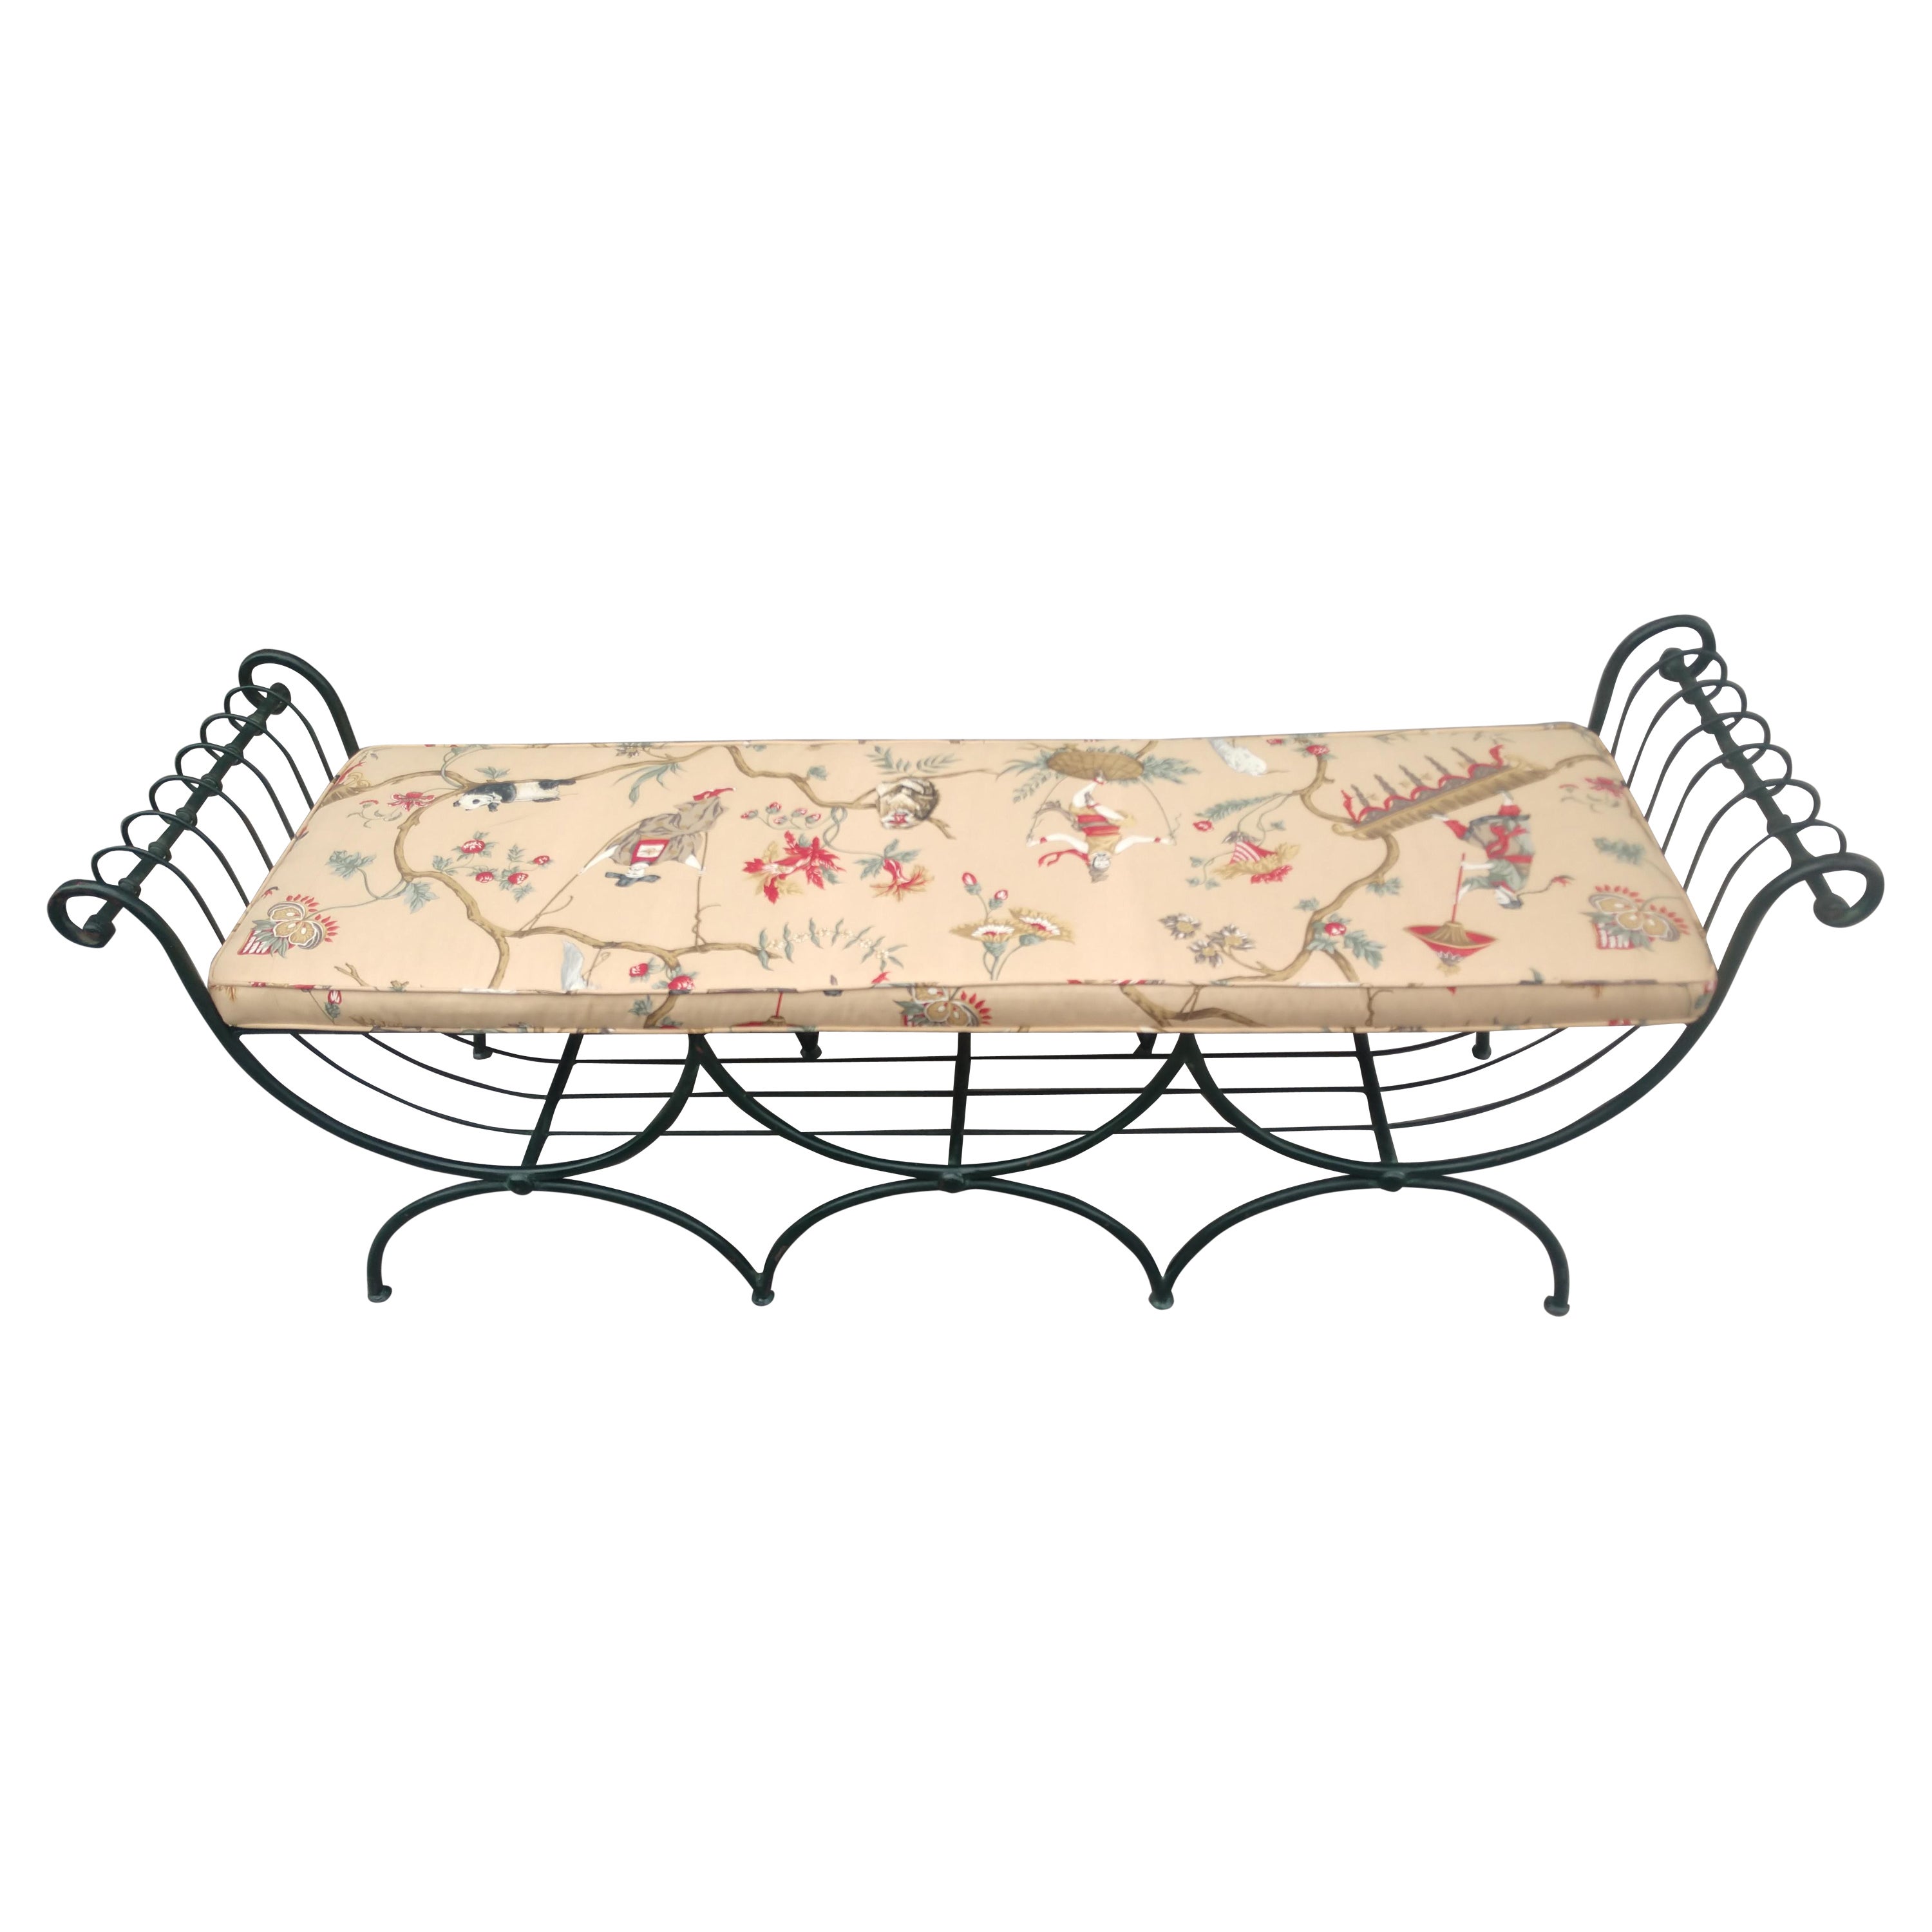 Large Patinated Iron Bench with Cushion by John Salterini